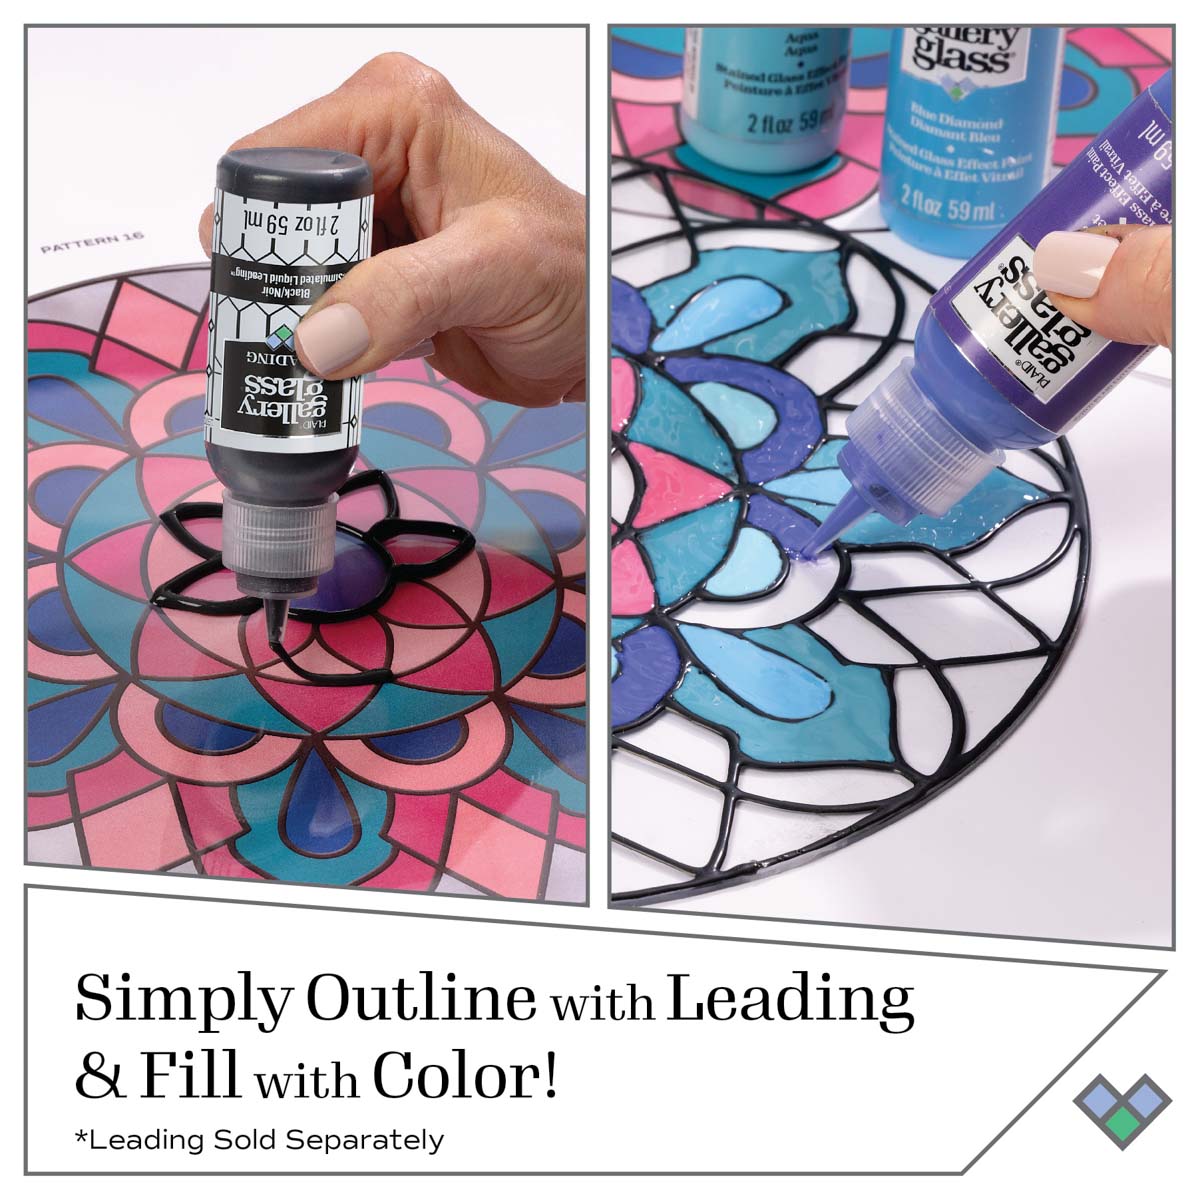 Gallery Glass ® Stained Glass Effect Paint - Turquoise, 2 oz. - 19732